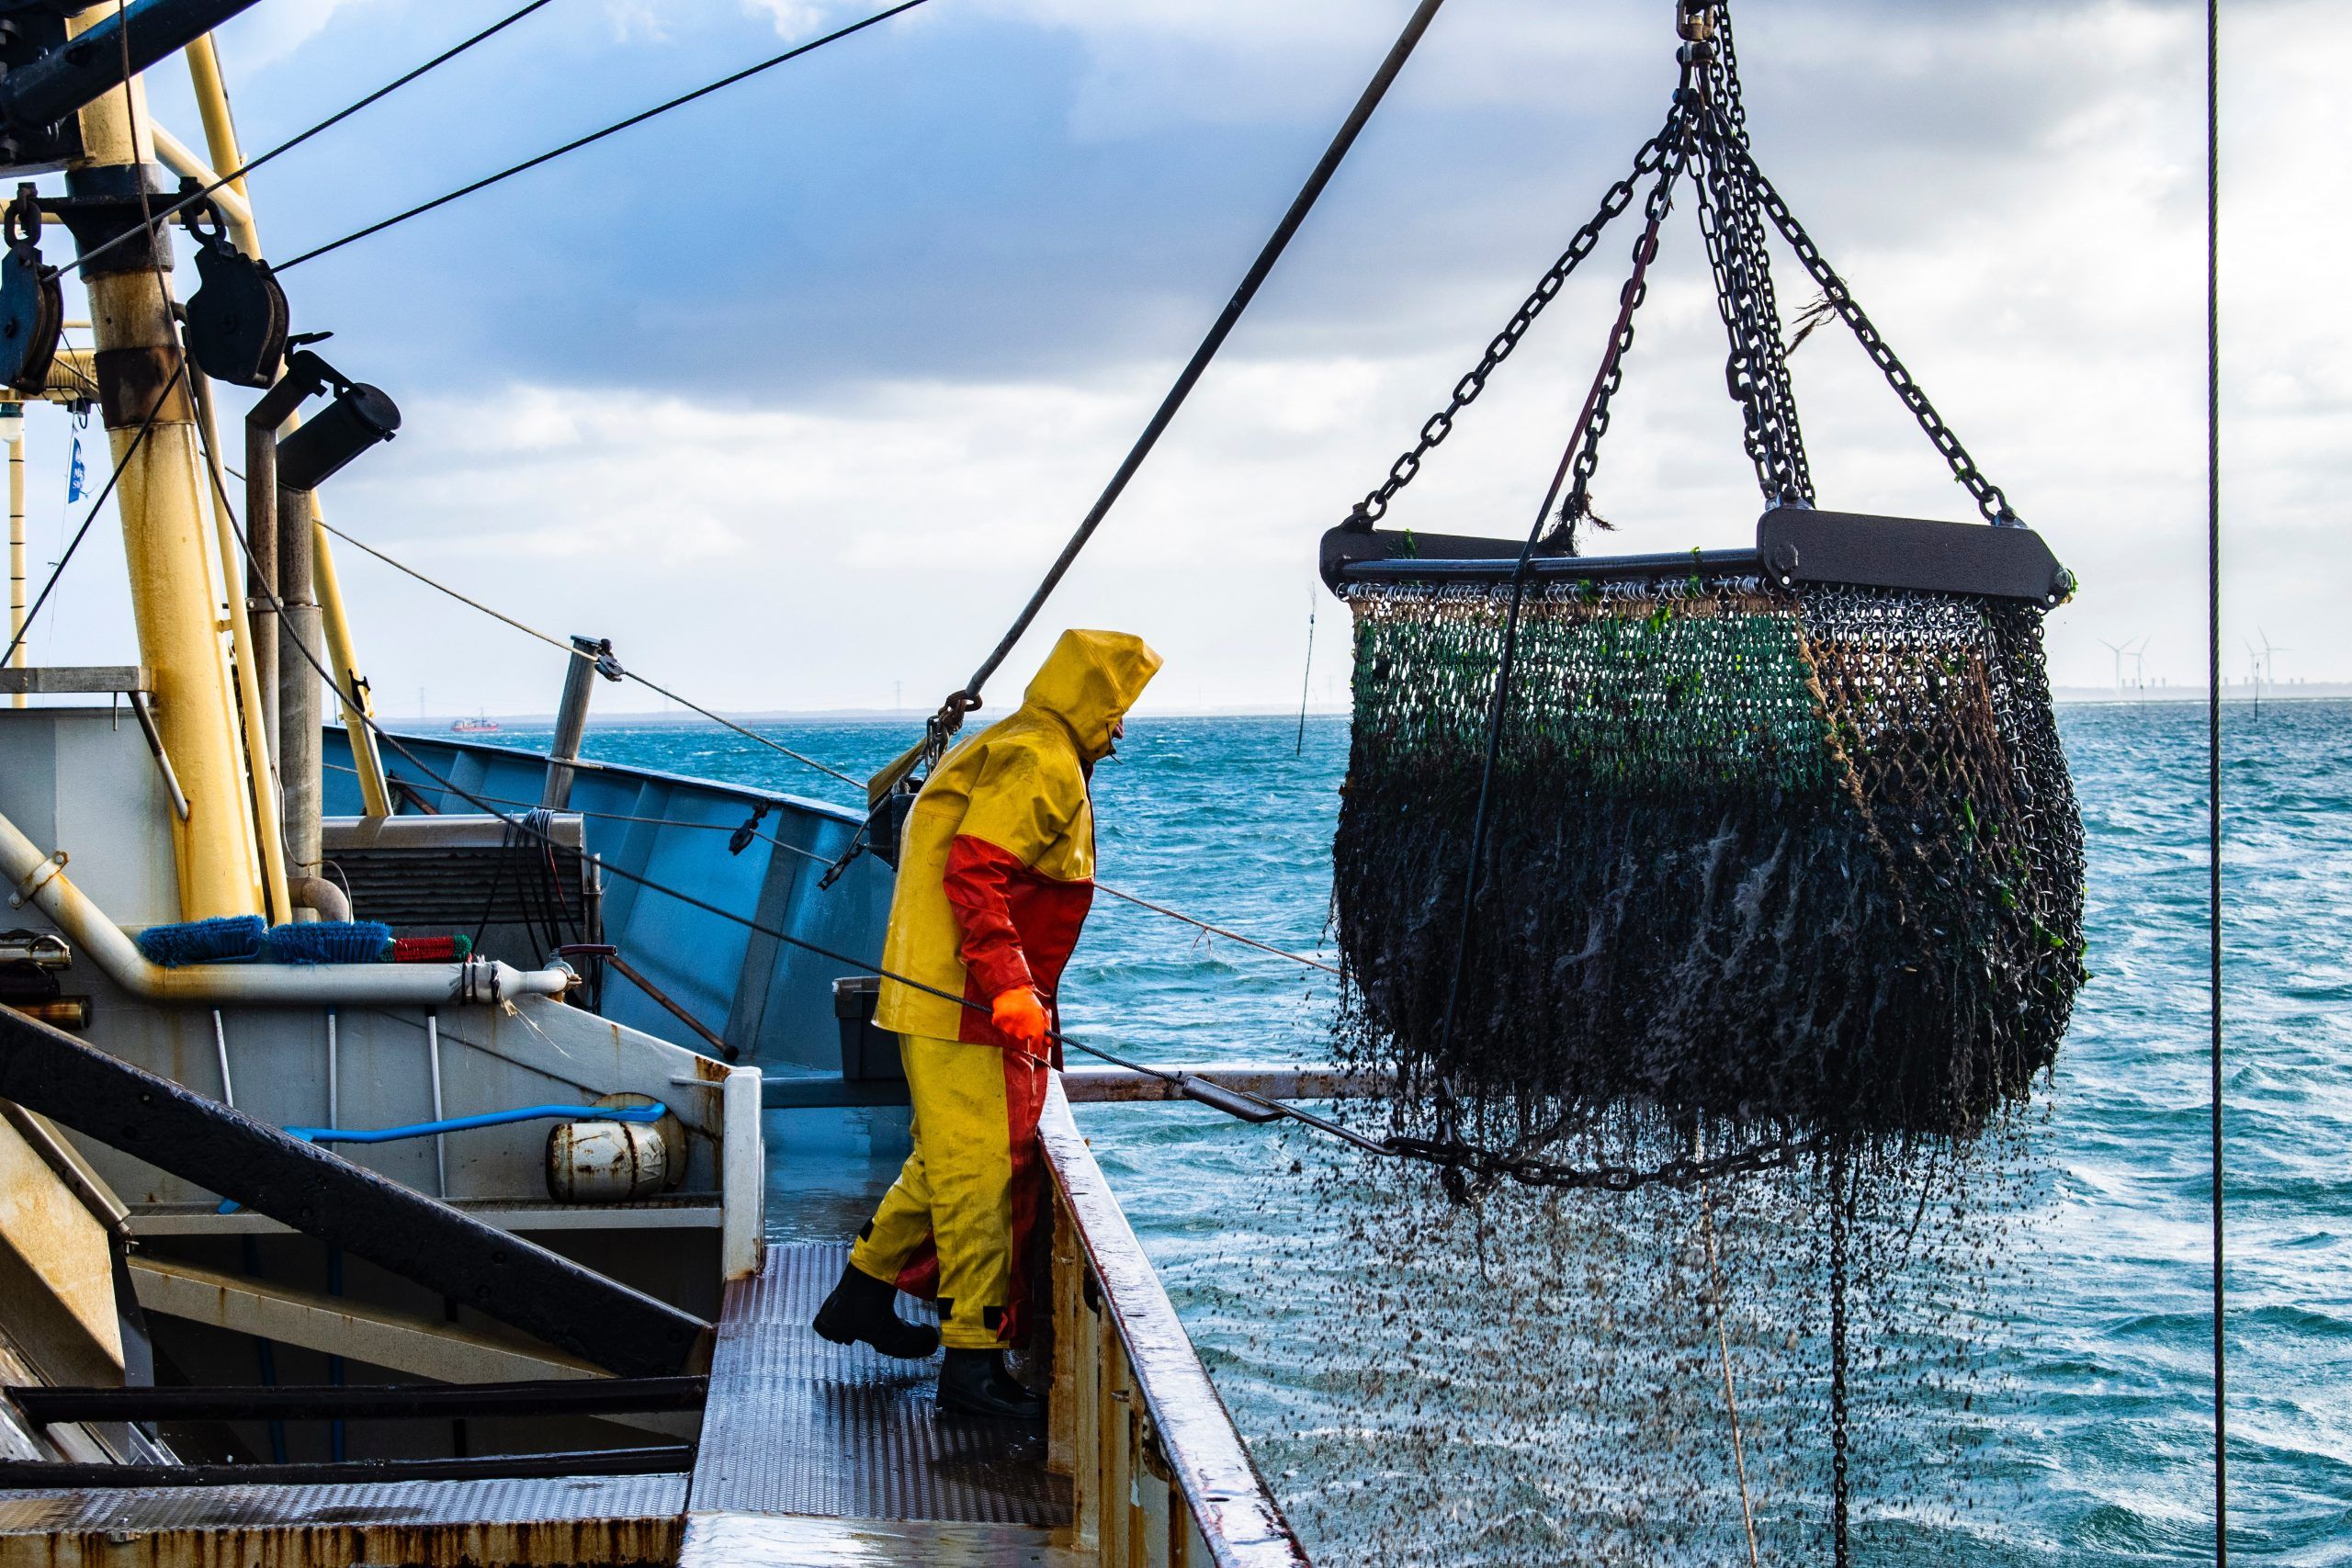 Fisheries management review: less overfishing, more efforts to protect marine resources